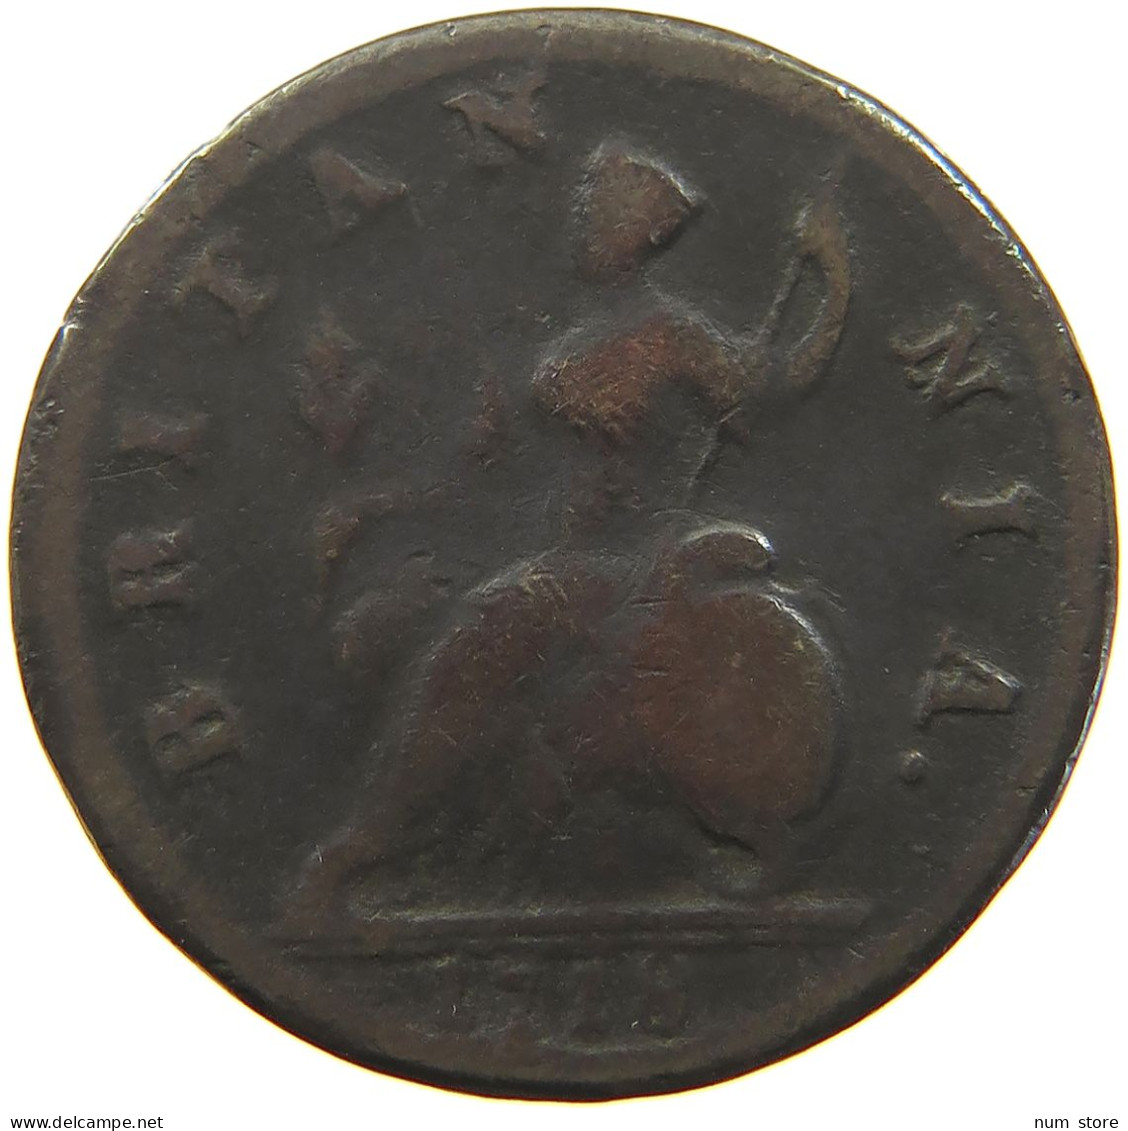 GREAT BRITAIN HALFPENNY 1718 George I. (1714-1727) #t021 0281 - B. 1/2 Penny